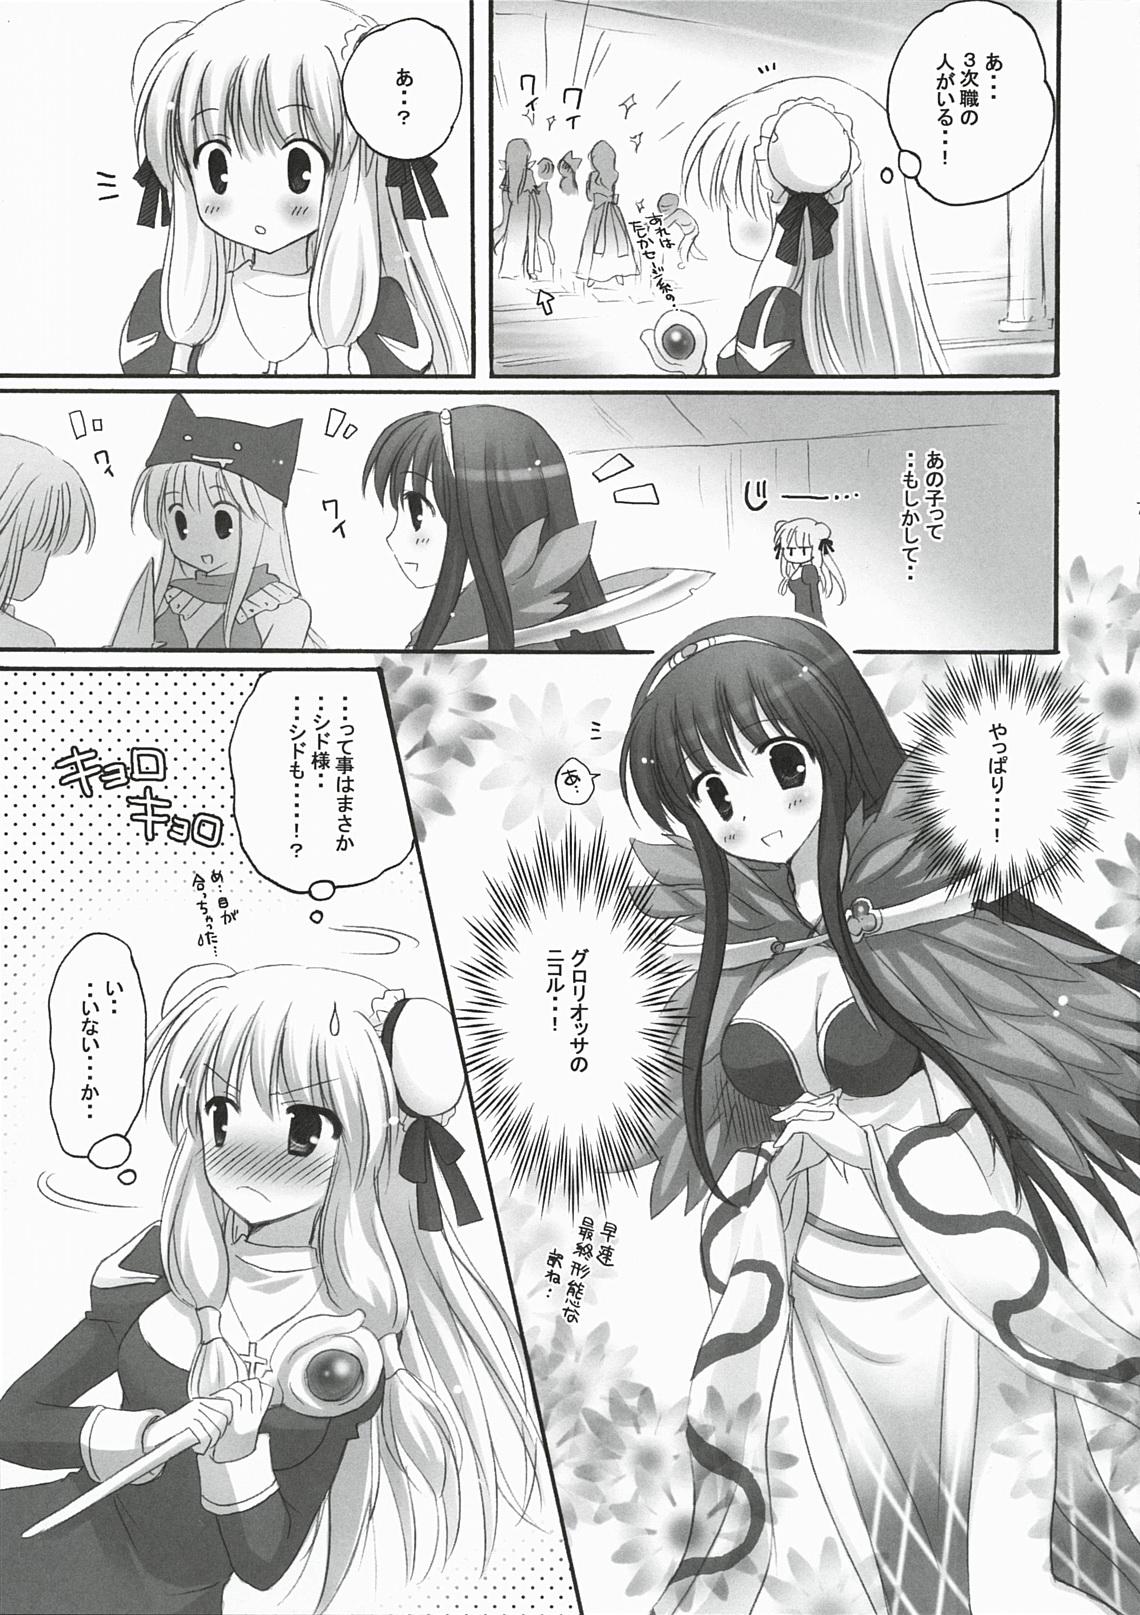 Black Woman You are mine - Ragnarok online Missionary - Page 6